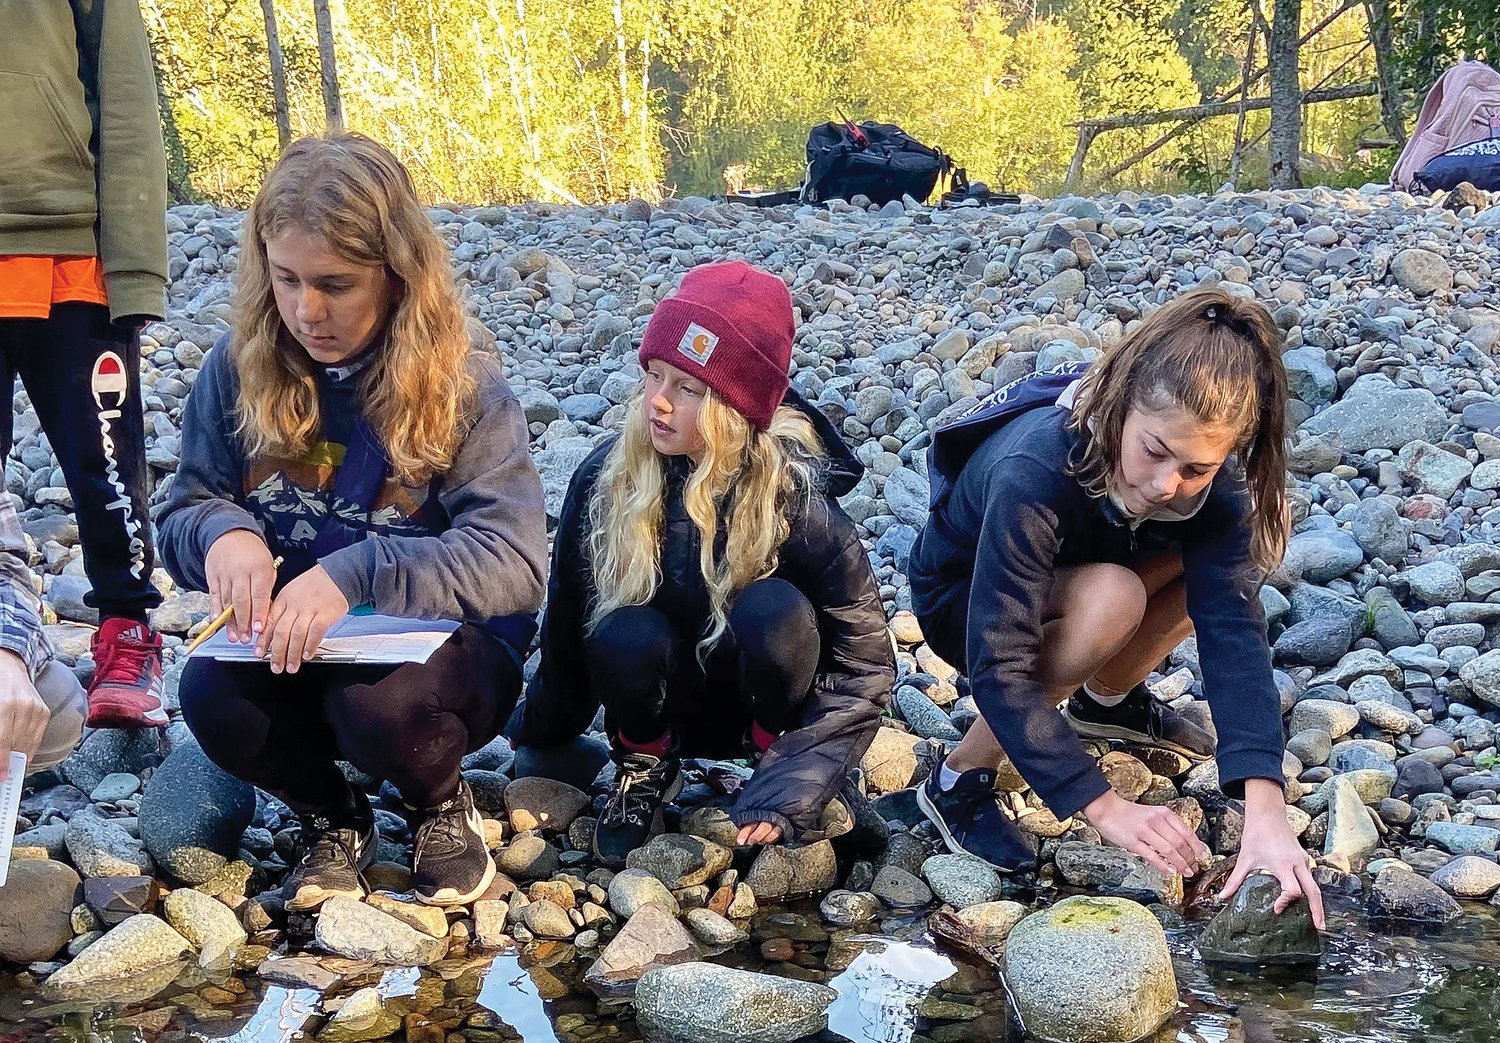 Ruby Stenbak, Jane Murri and Sophie Lanham collect water samples as part of a science lesson at the Cispus Outdoor School.